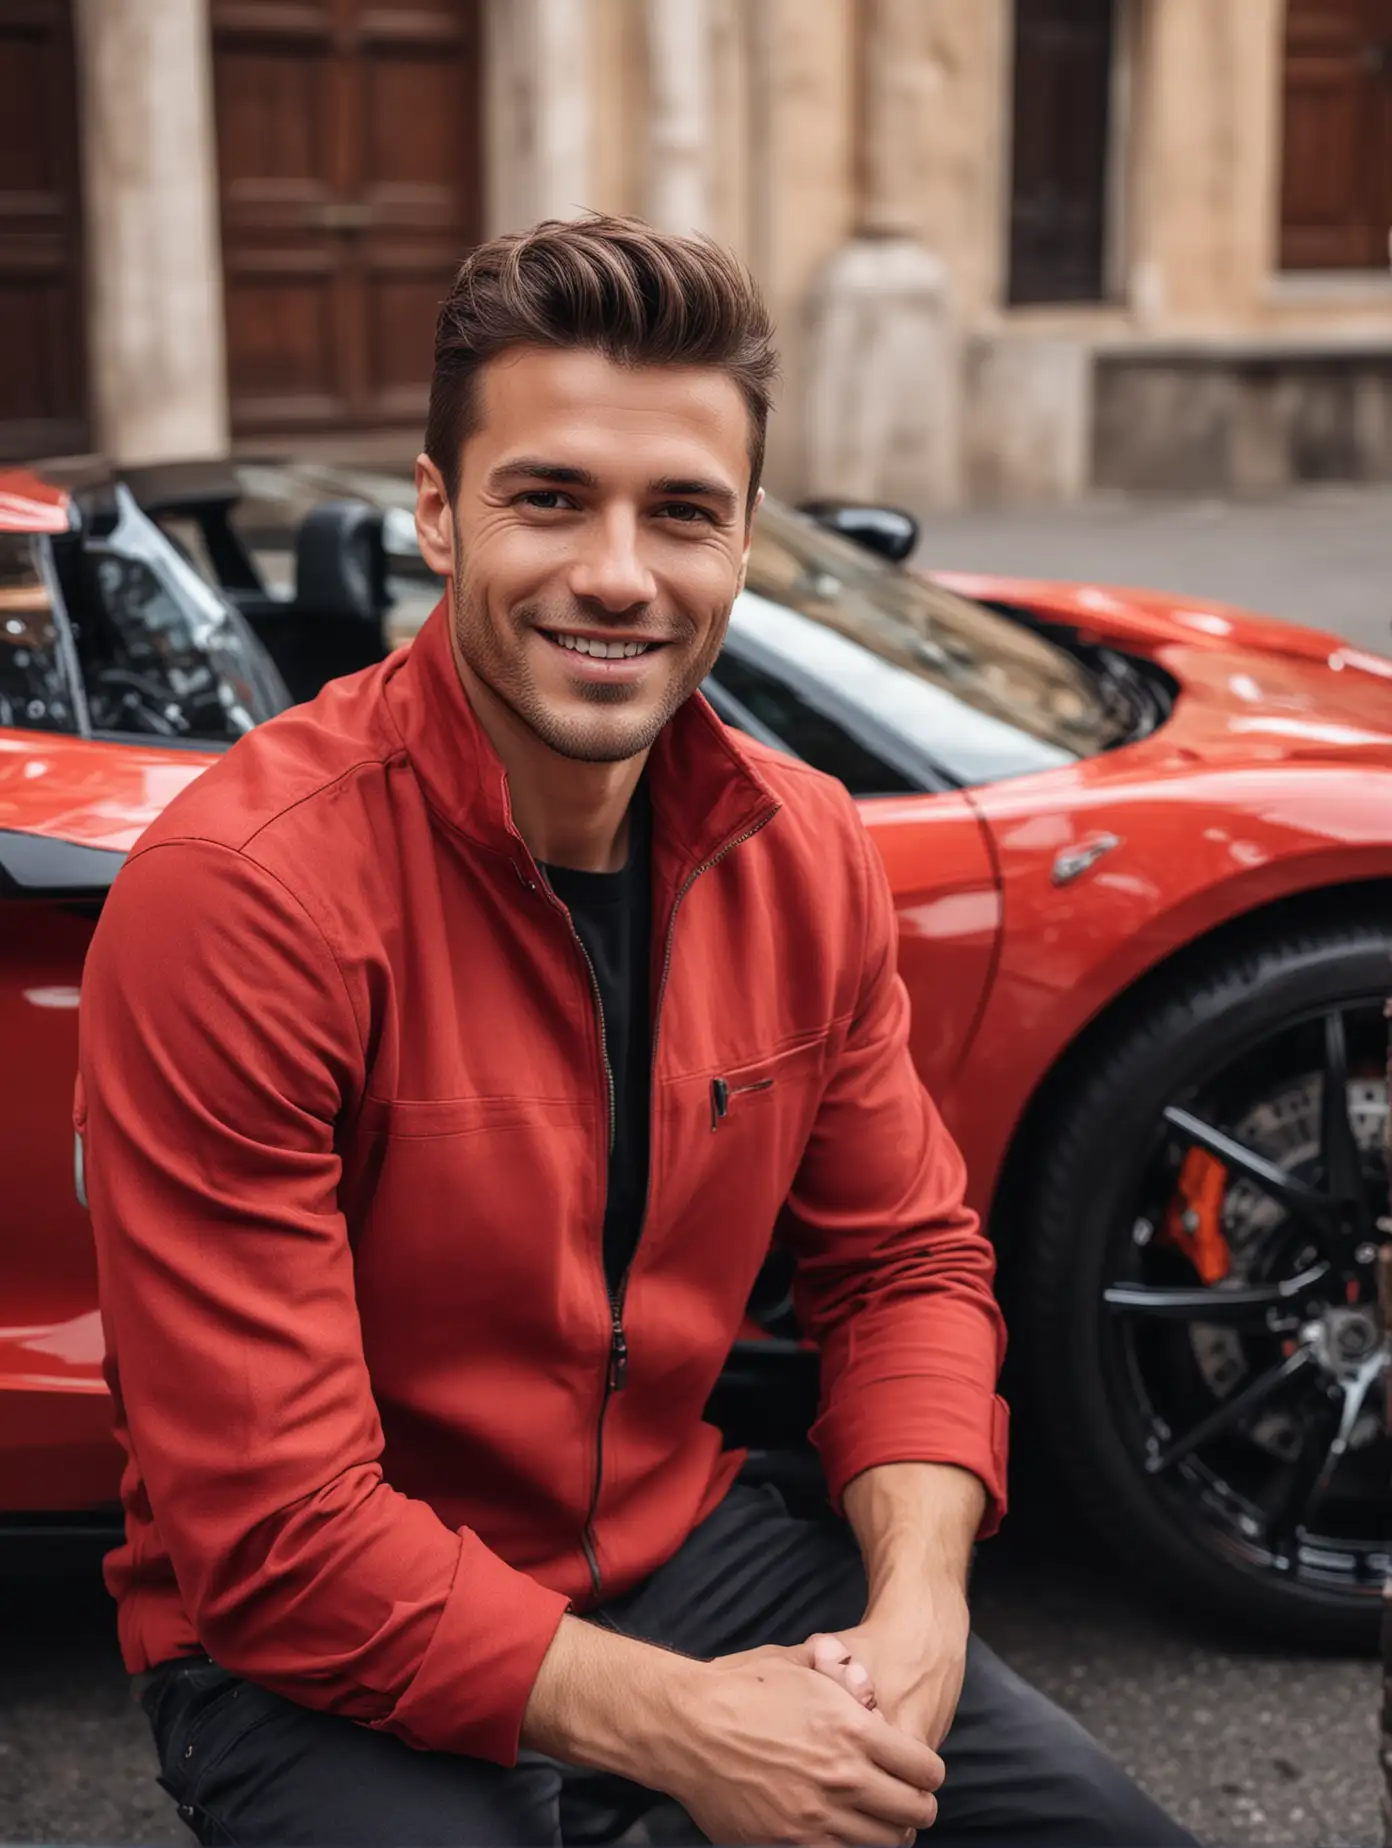 Handsome male leaning on a red supercar, facing the camera, smiling, exquisite facial features